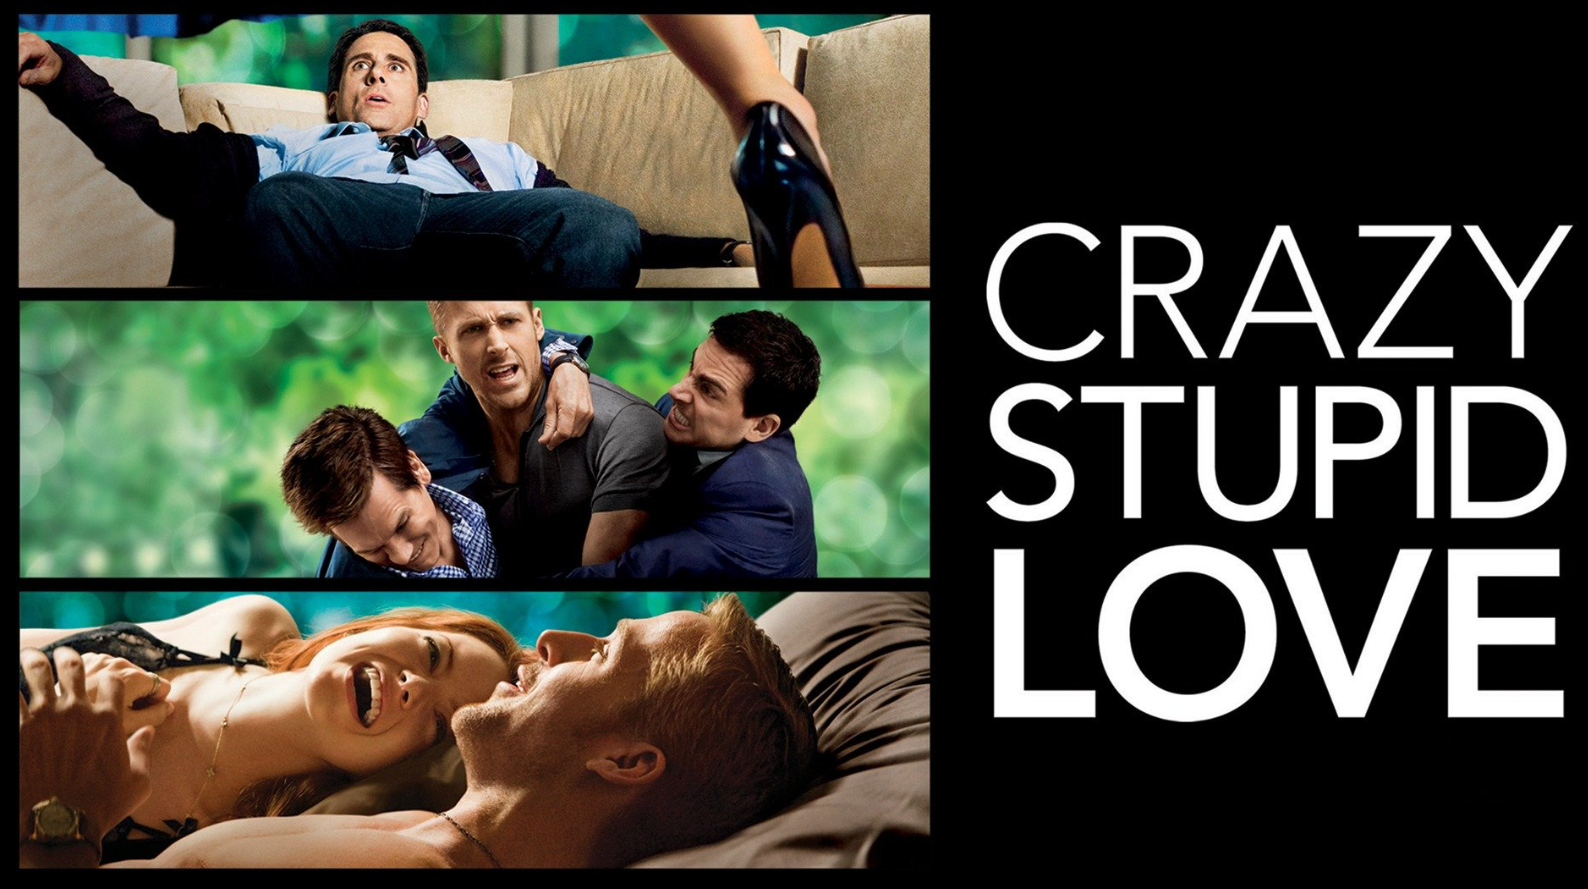 Crazy, Stupid, Love is coming to Netflix on March 1